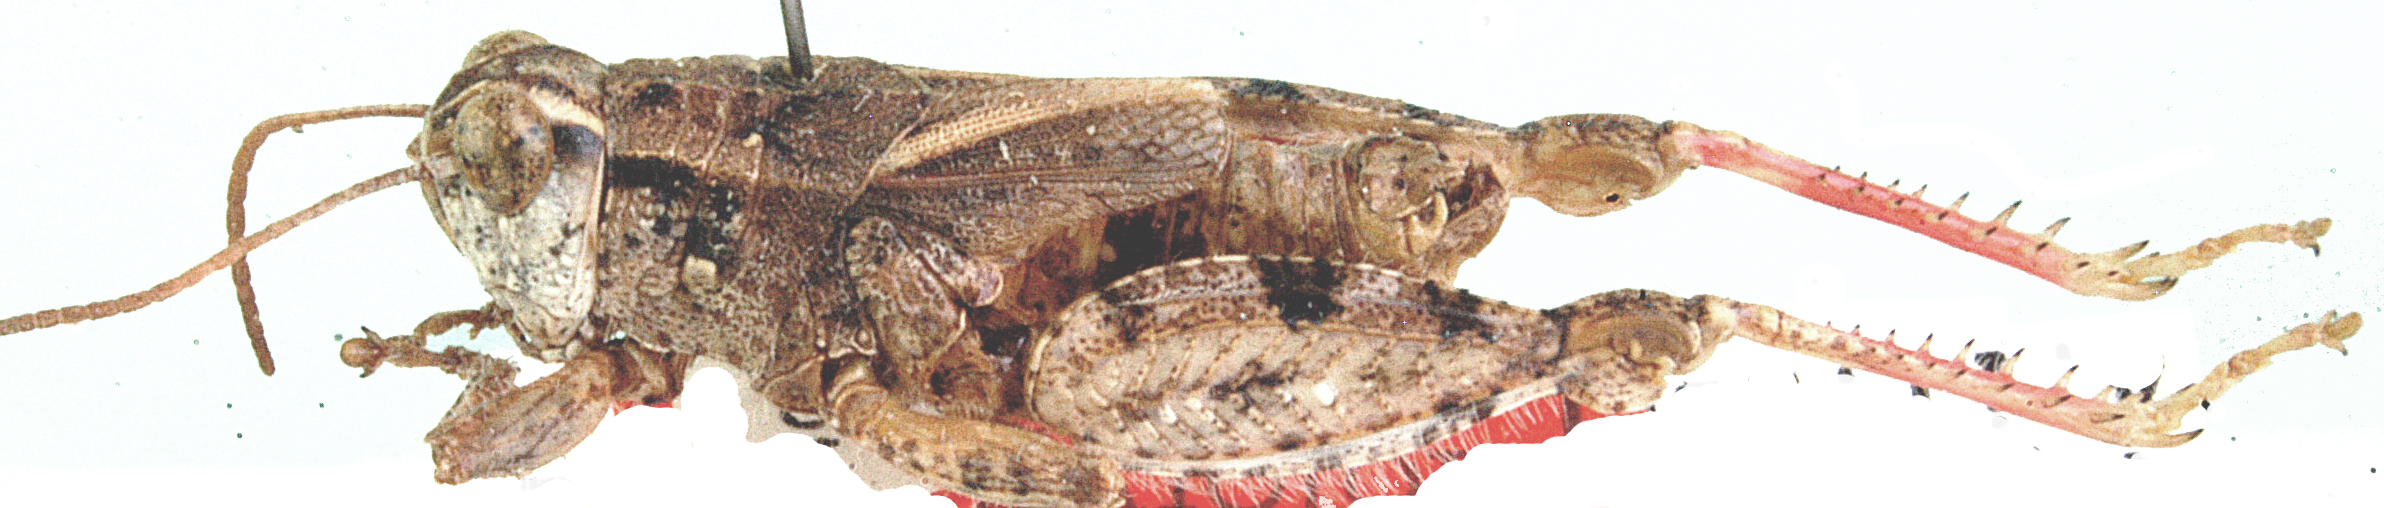 male, lateral view. Depicts Brachyphymus siloana Willemse, 1994, an Otu.